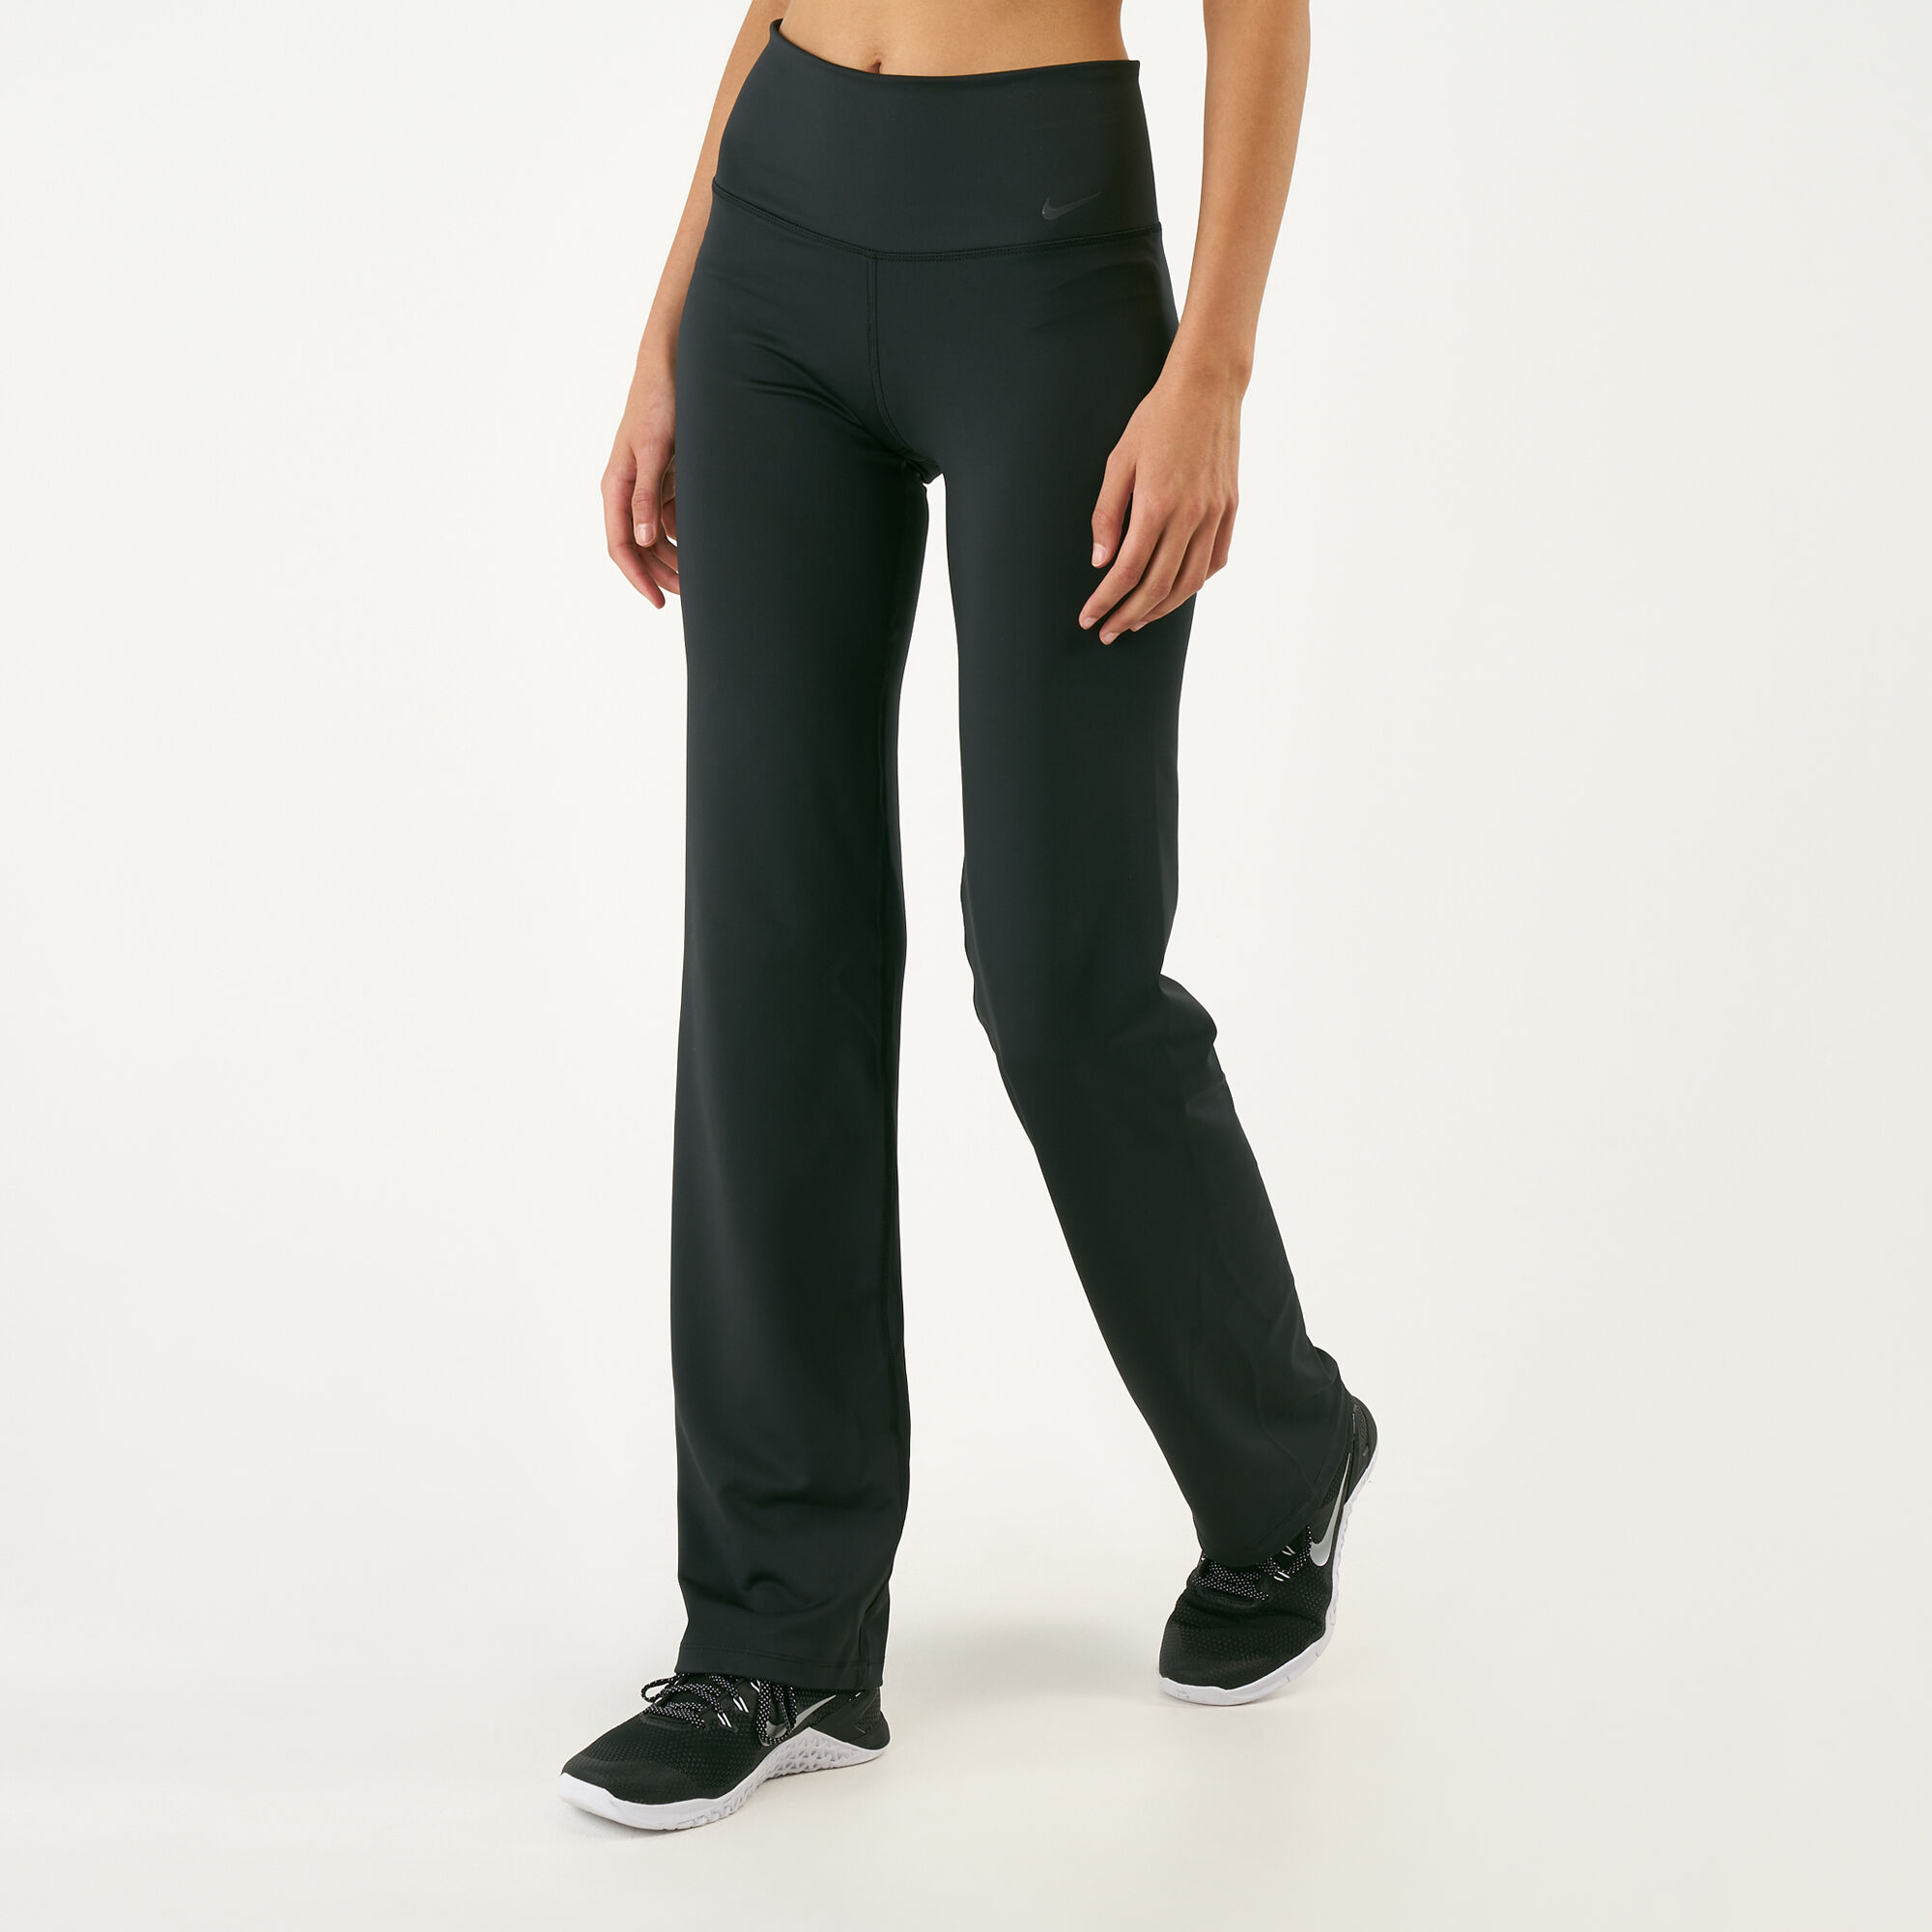 Shop Workout Clothes - Best Price at DICK'S